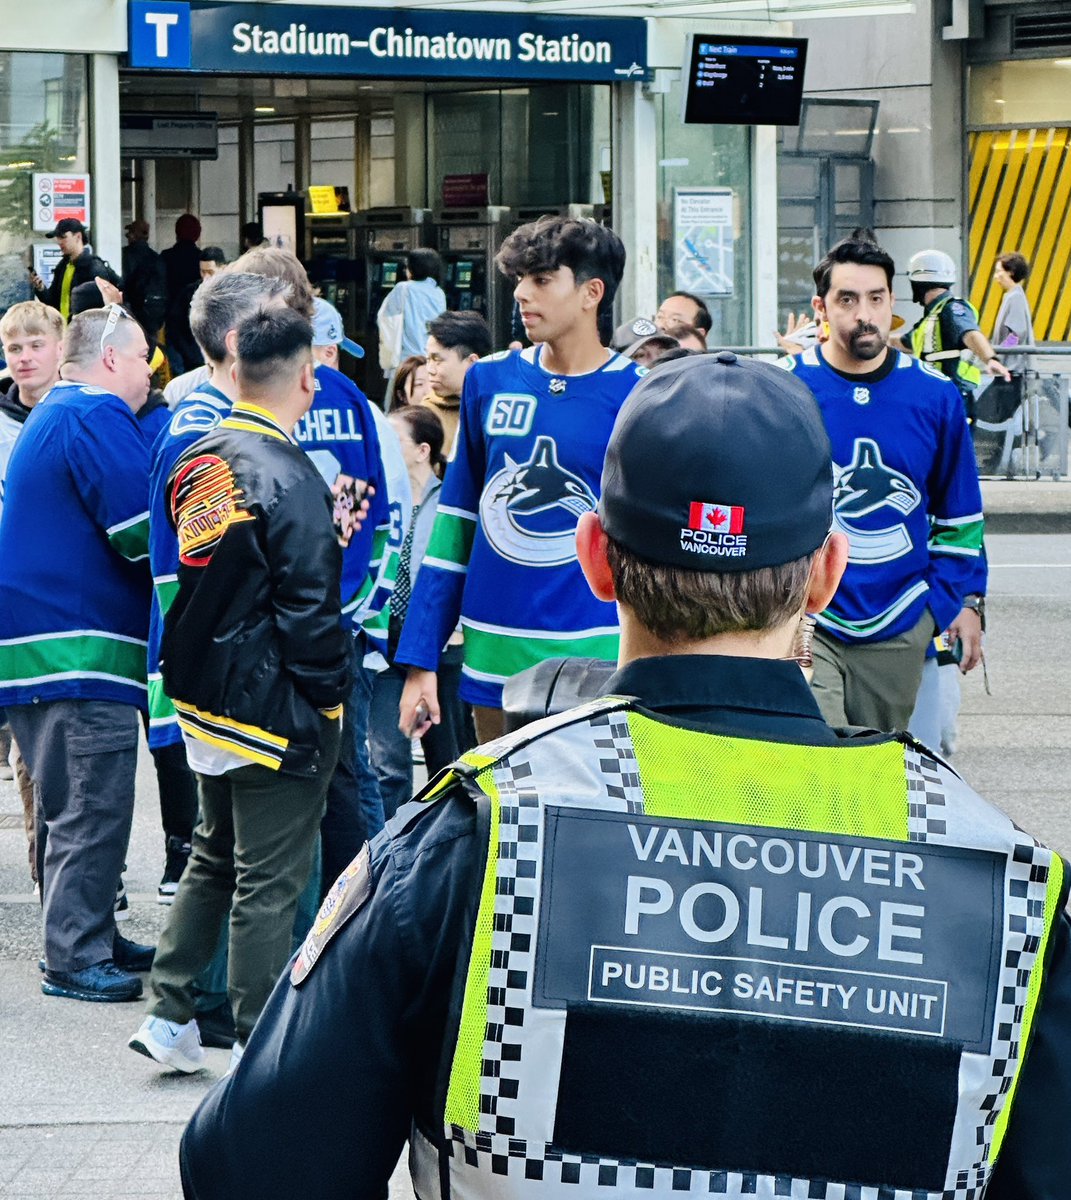 Sidewalks and the plaza outside of Rogers Arena are full as people make their way in for game 2. It’s a good idea to plan a meeting spot with your group in case you get separated. Need help? Just ask one of our officers in highly visible vests.